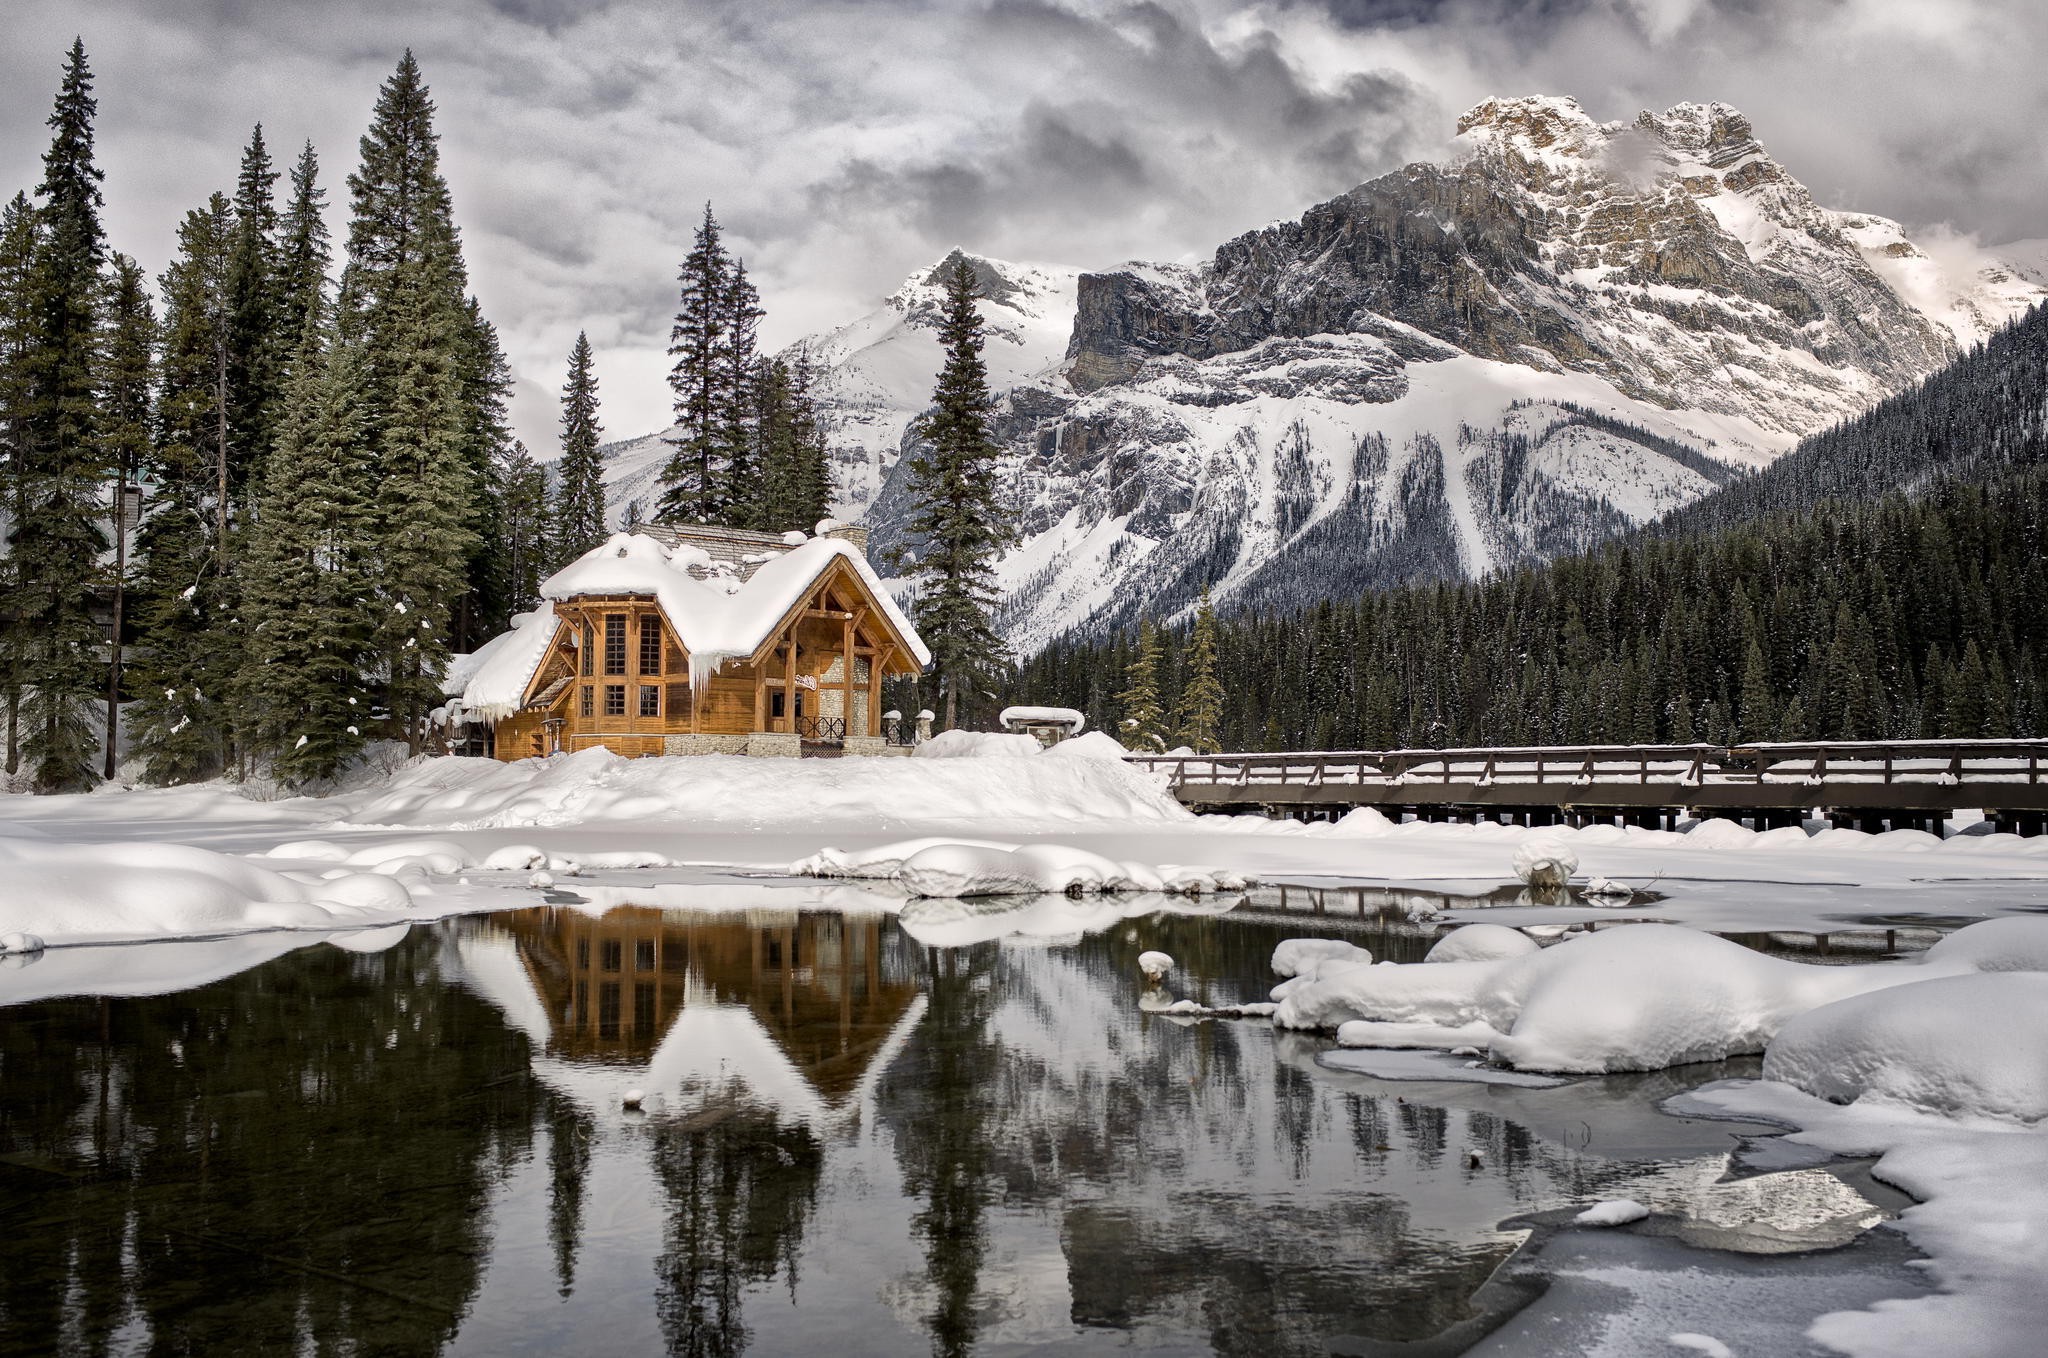 nature, Landscape, Mountain, Snow, Water, Clouds, Trees, British Columbia, Canada, Winter, Lake, Forest, Ice, House, Reflection Wallpaper